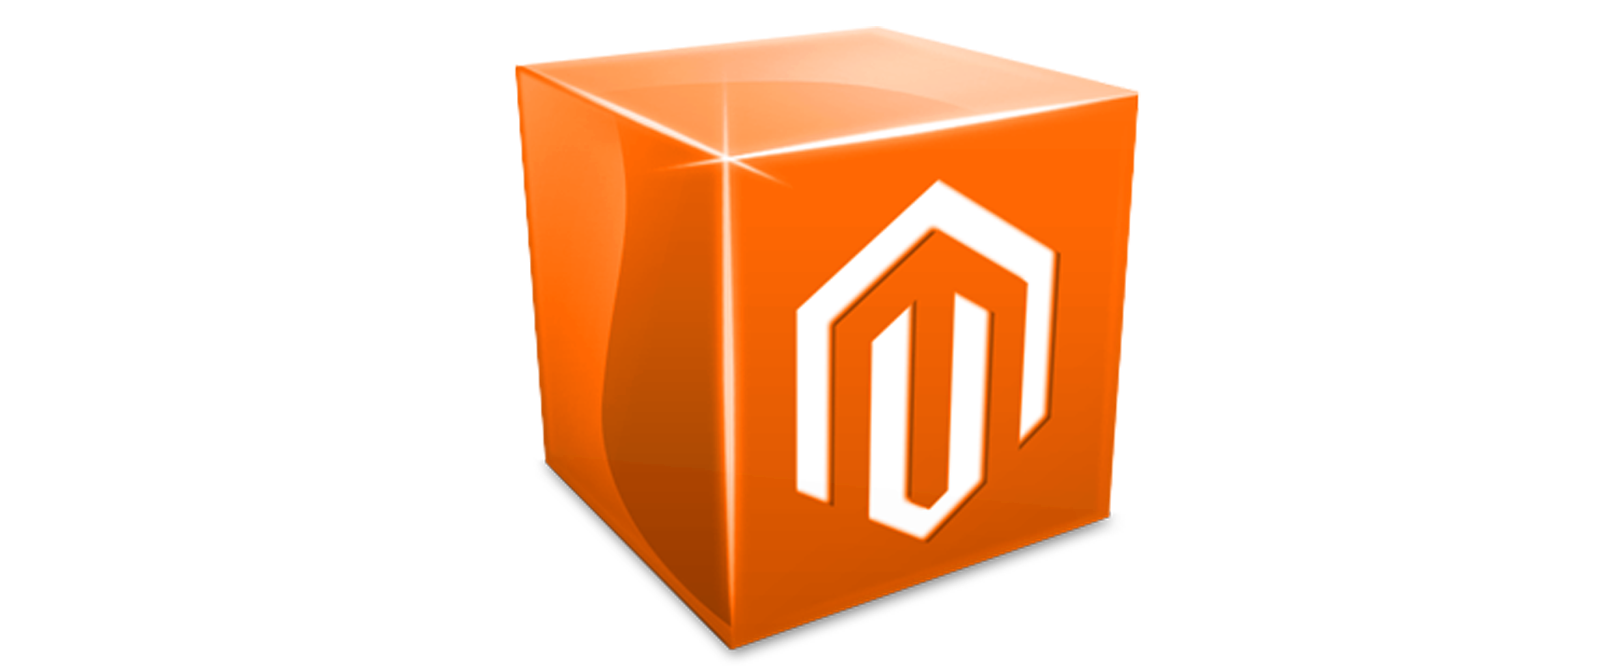 Download PNG image - Magento PNG HD 